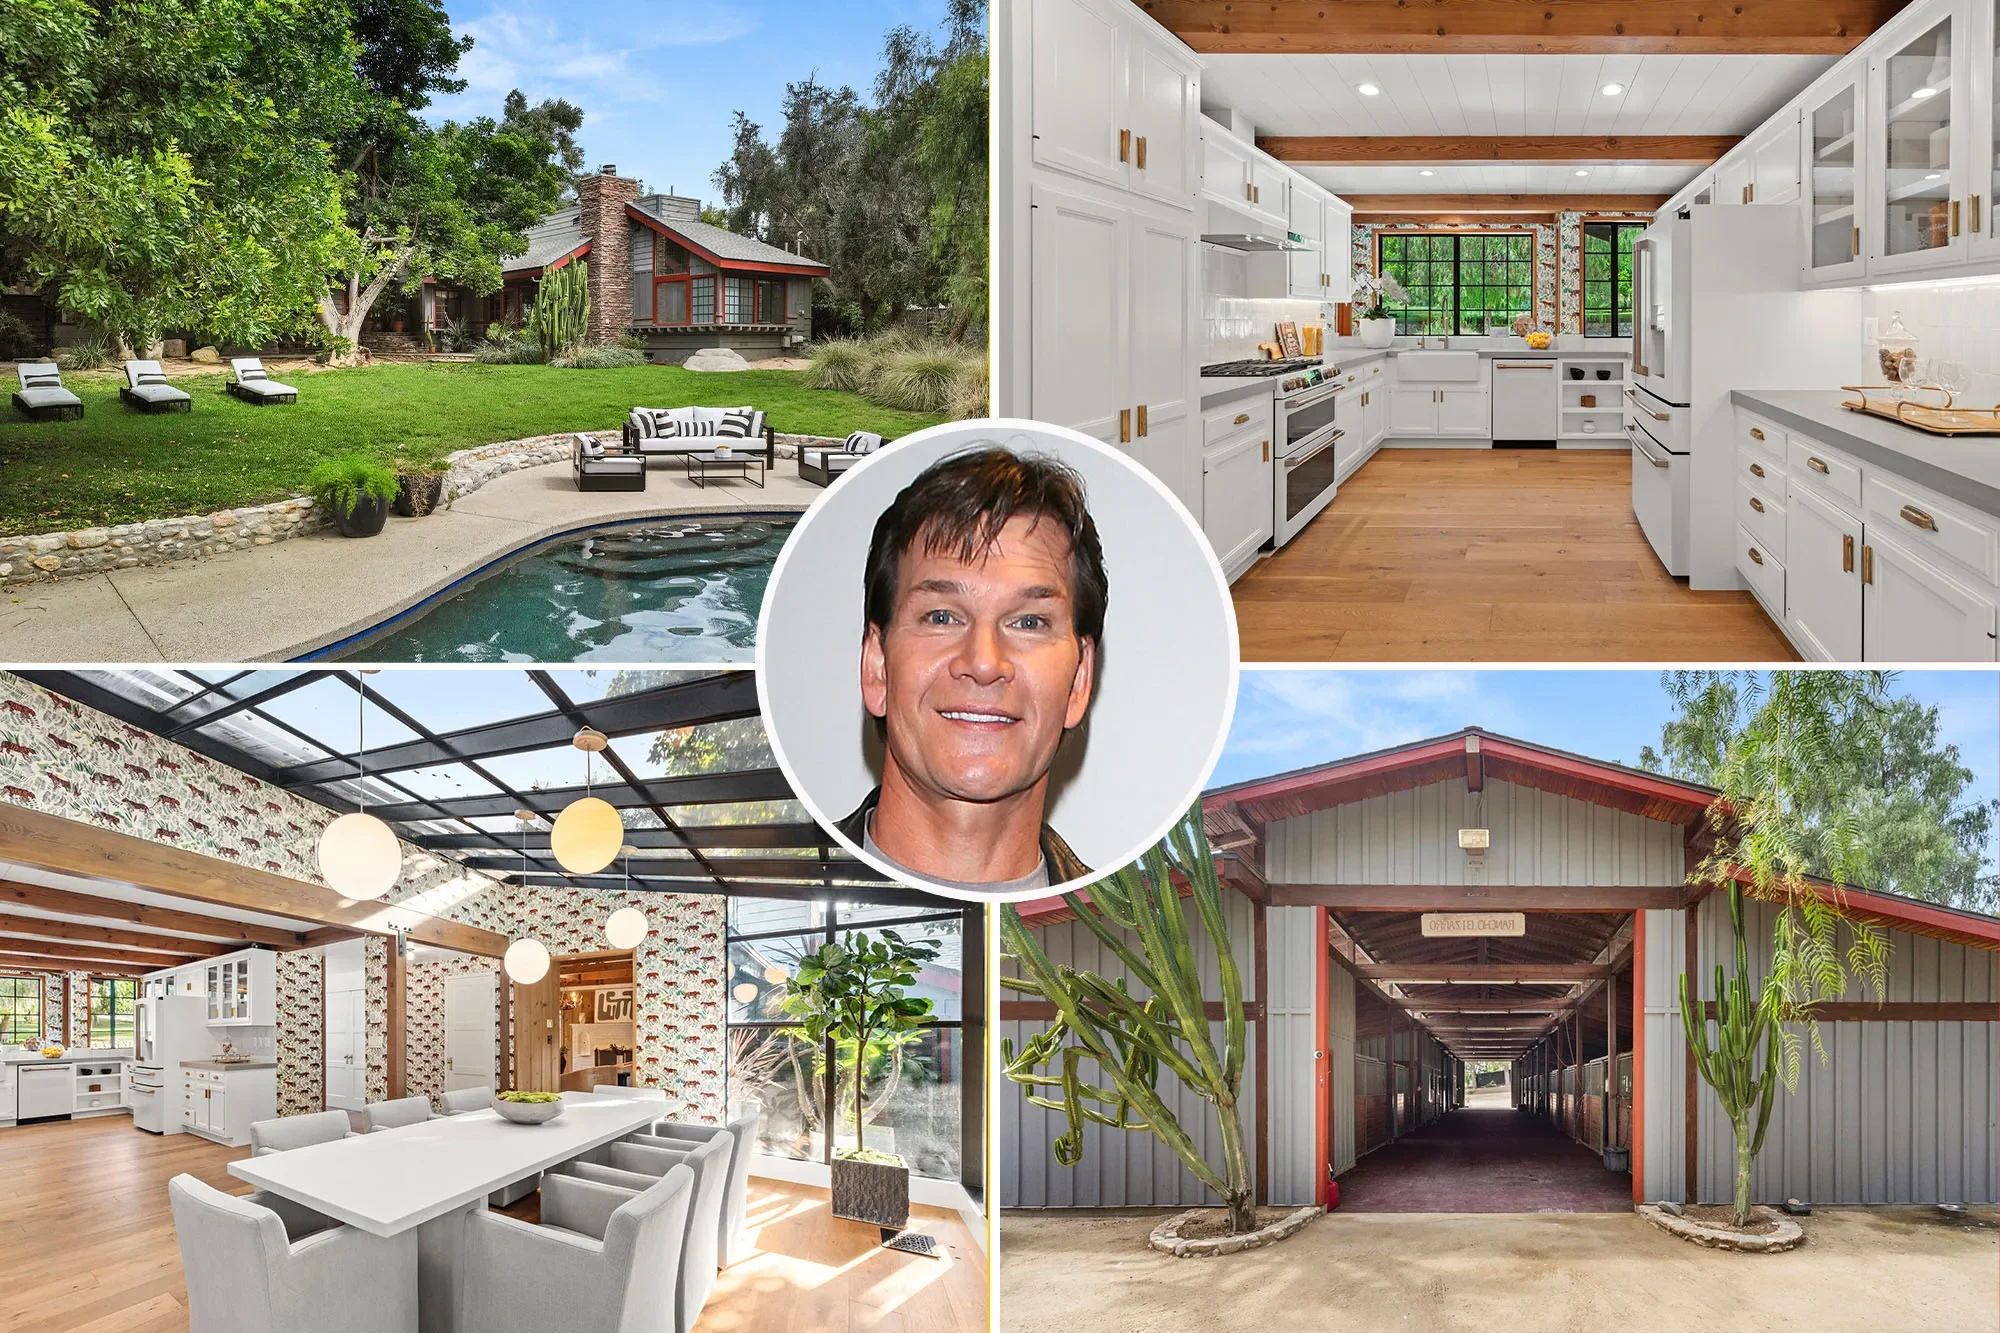 Patrick Swayze's former ranch in Los Angeles goes on the market for $ 4.5 million